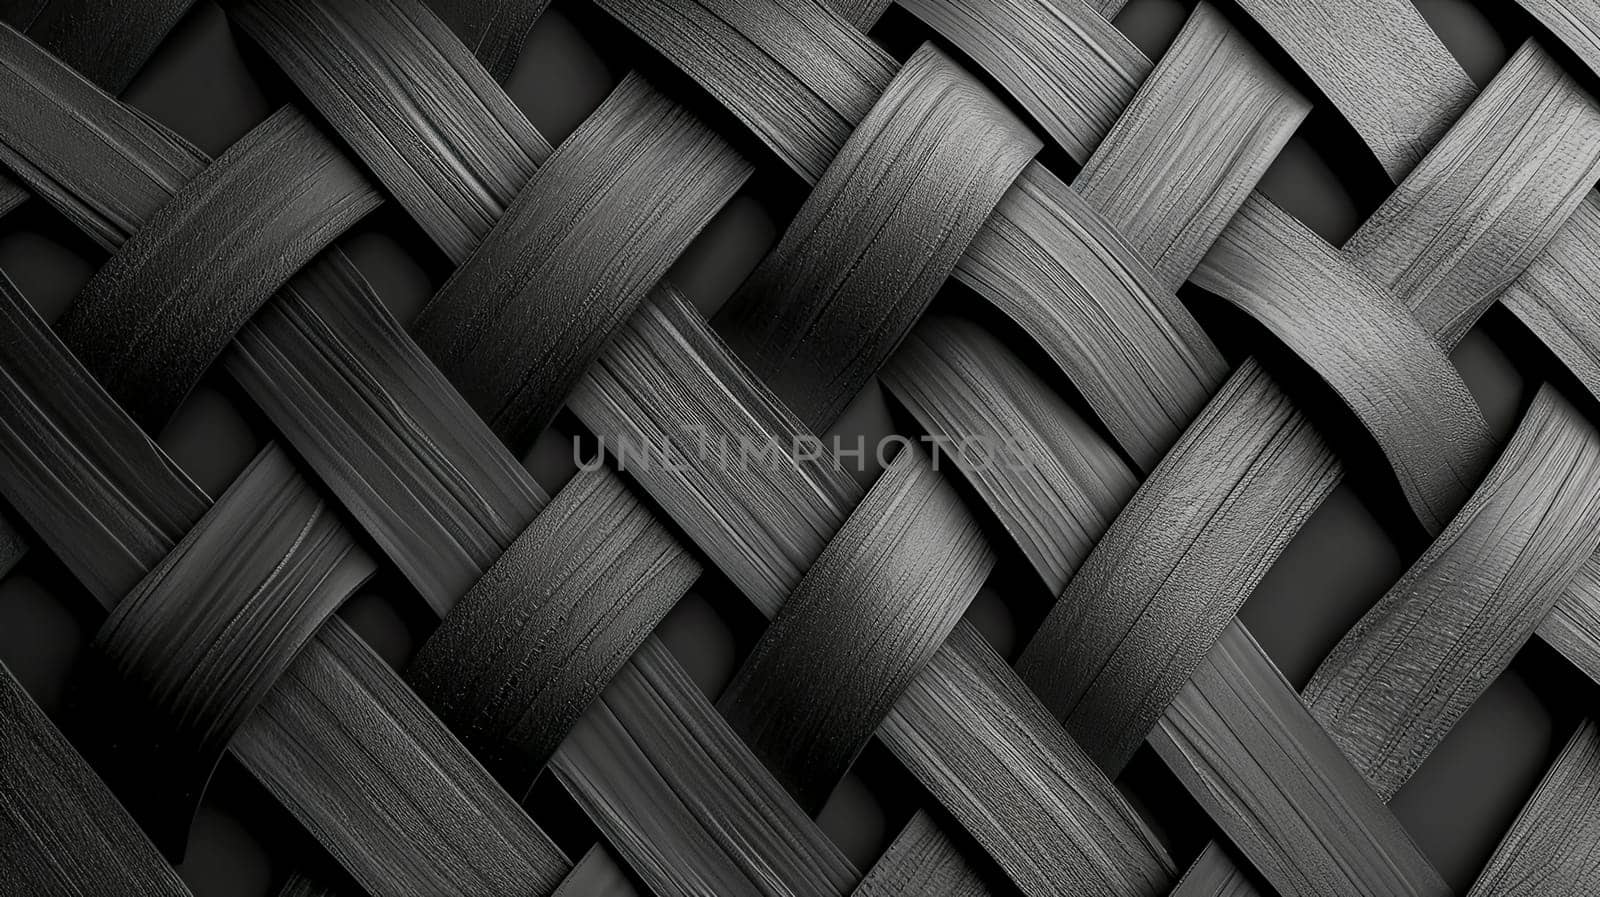 Interwoven Elegance: A dance of texture and shadow, this monochromatic crosshatch pattern weaves complexity into simplicity, creating a captivating visual tapestry by Edophoto